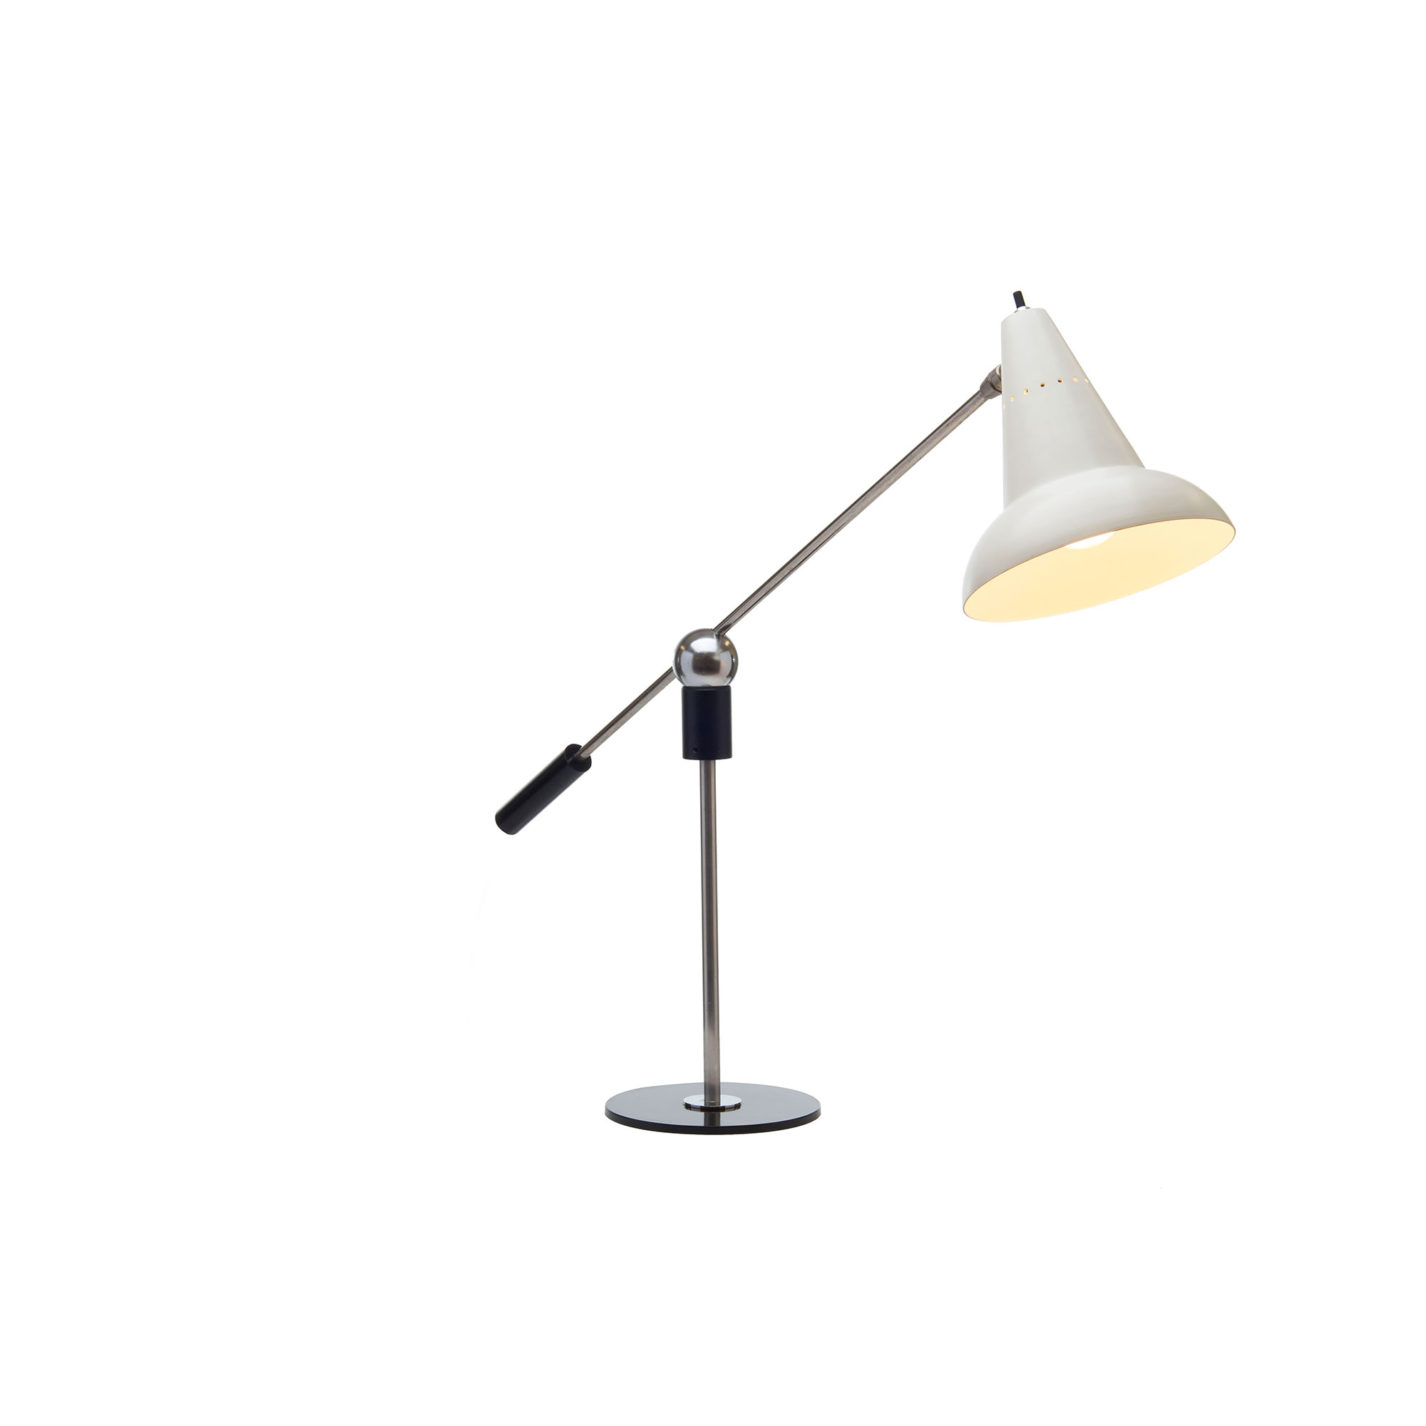 Table lamp made of two metal rods, one balanced atop the other, connected with a chrome sphere. At one end of the balanced rod is a cylindrical black weight and at the other end is the light source with a cone-shaped shade in white metal. 